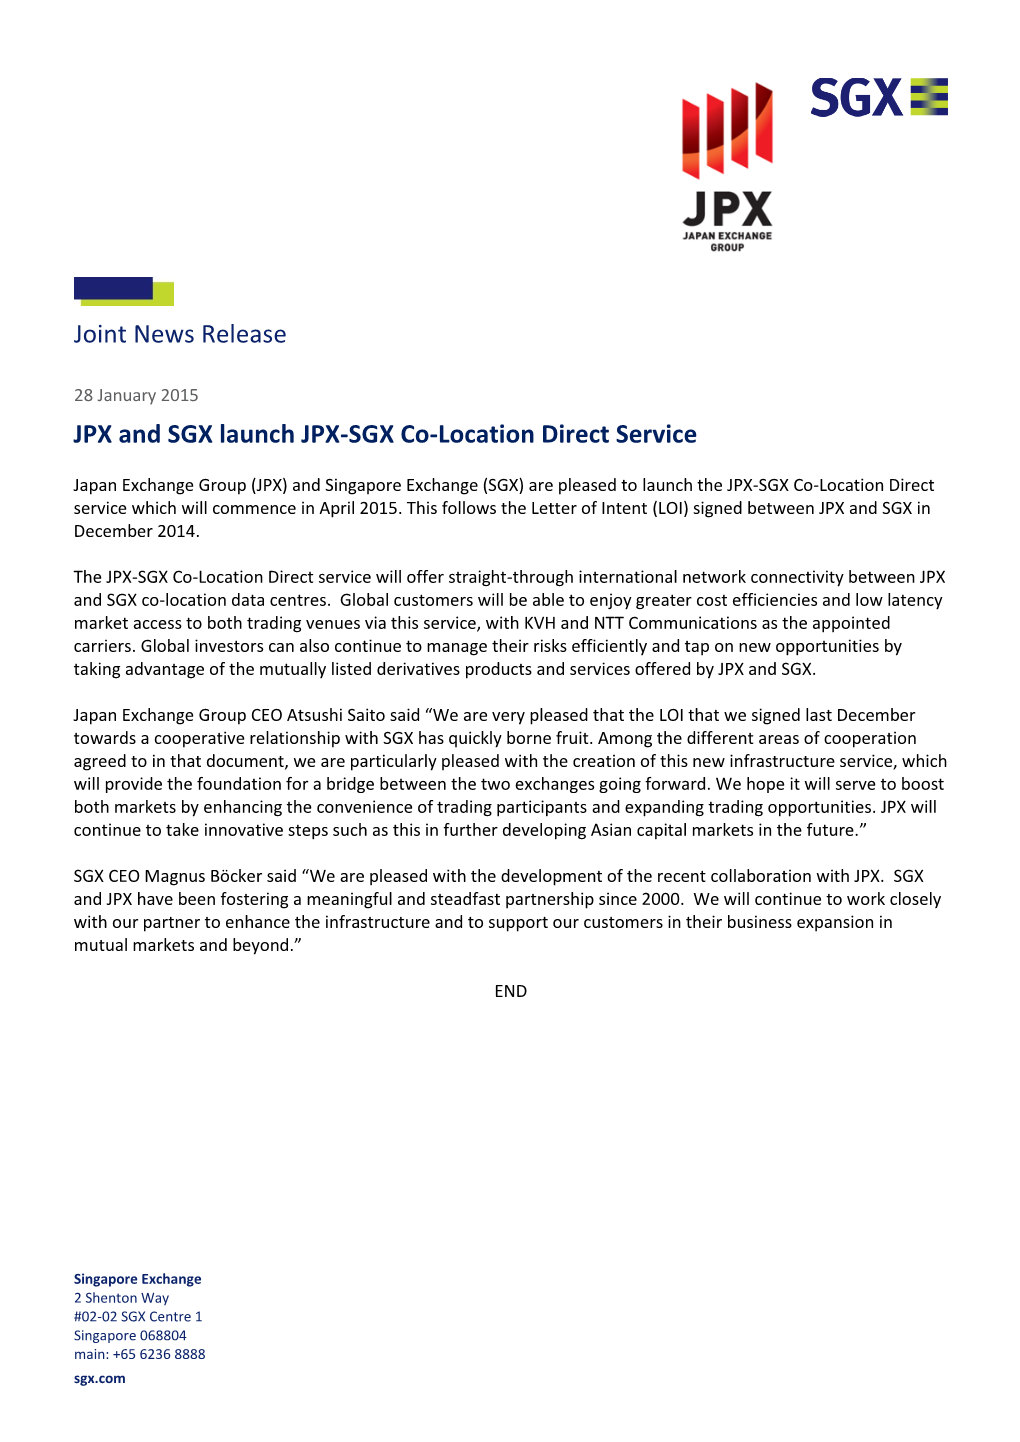 Joint News Release JPX and SGX Launch JPX-SGX Co-Location